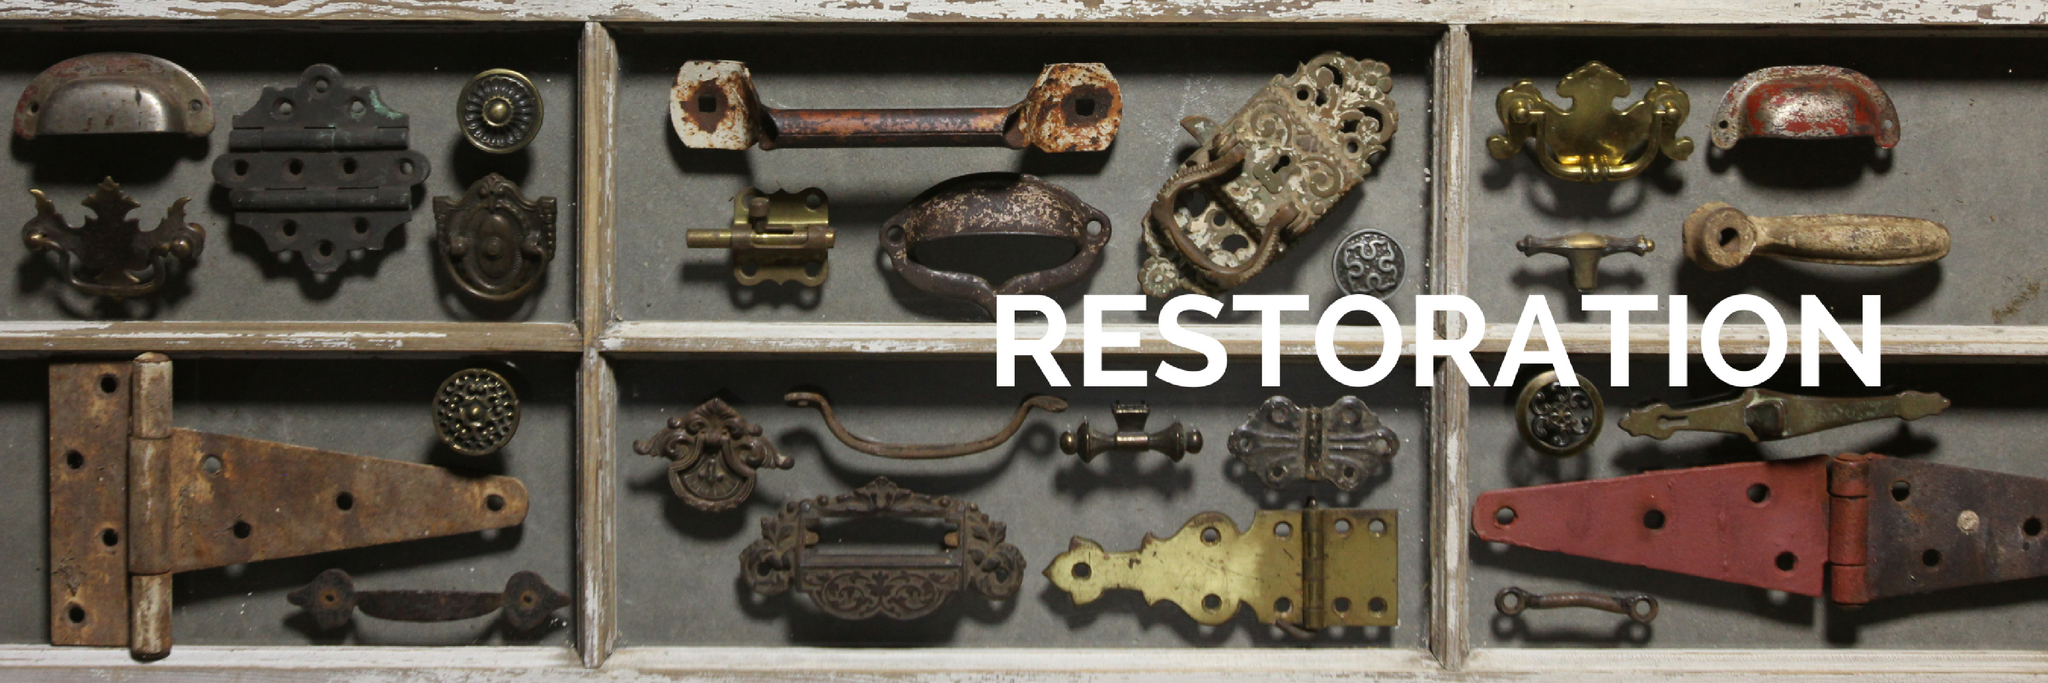 Collection of vintage and antique items used for home and building restoration